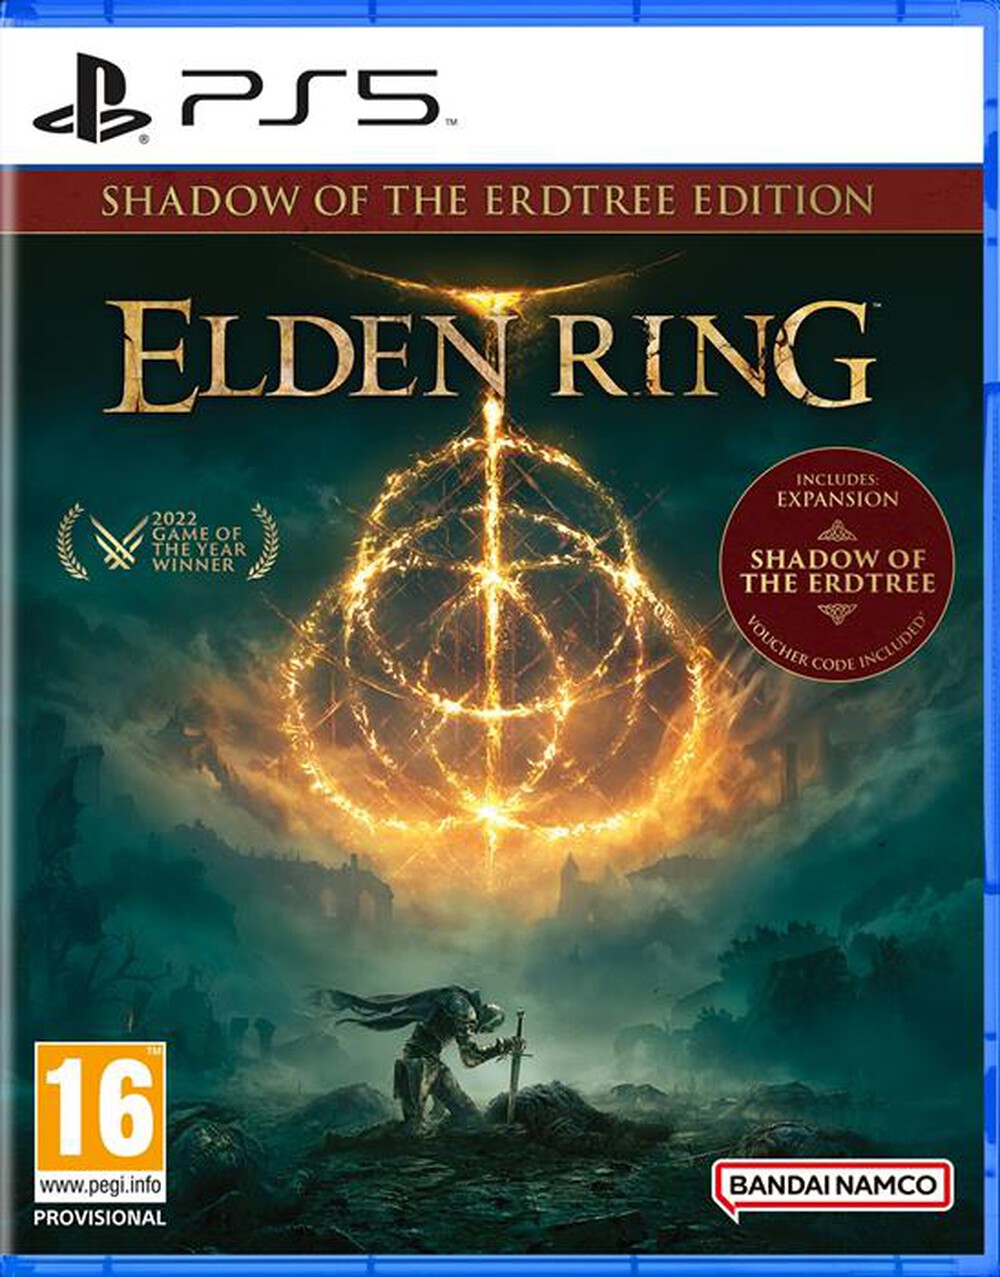 "NAMCO - ELDEN RING SHADOW OF THE ERDTREE PS5"